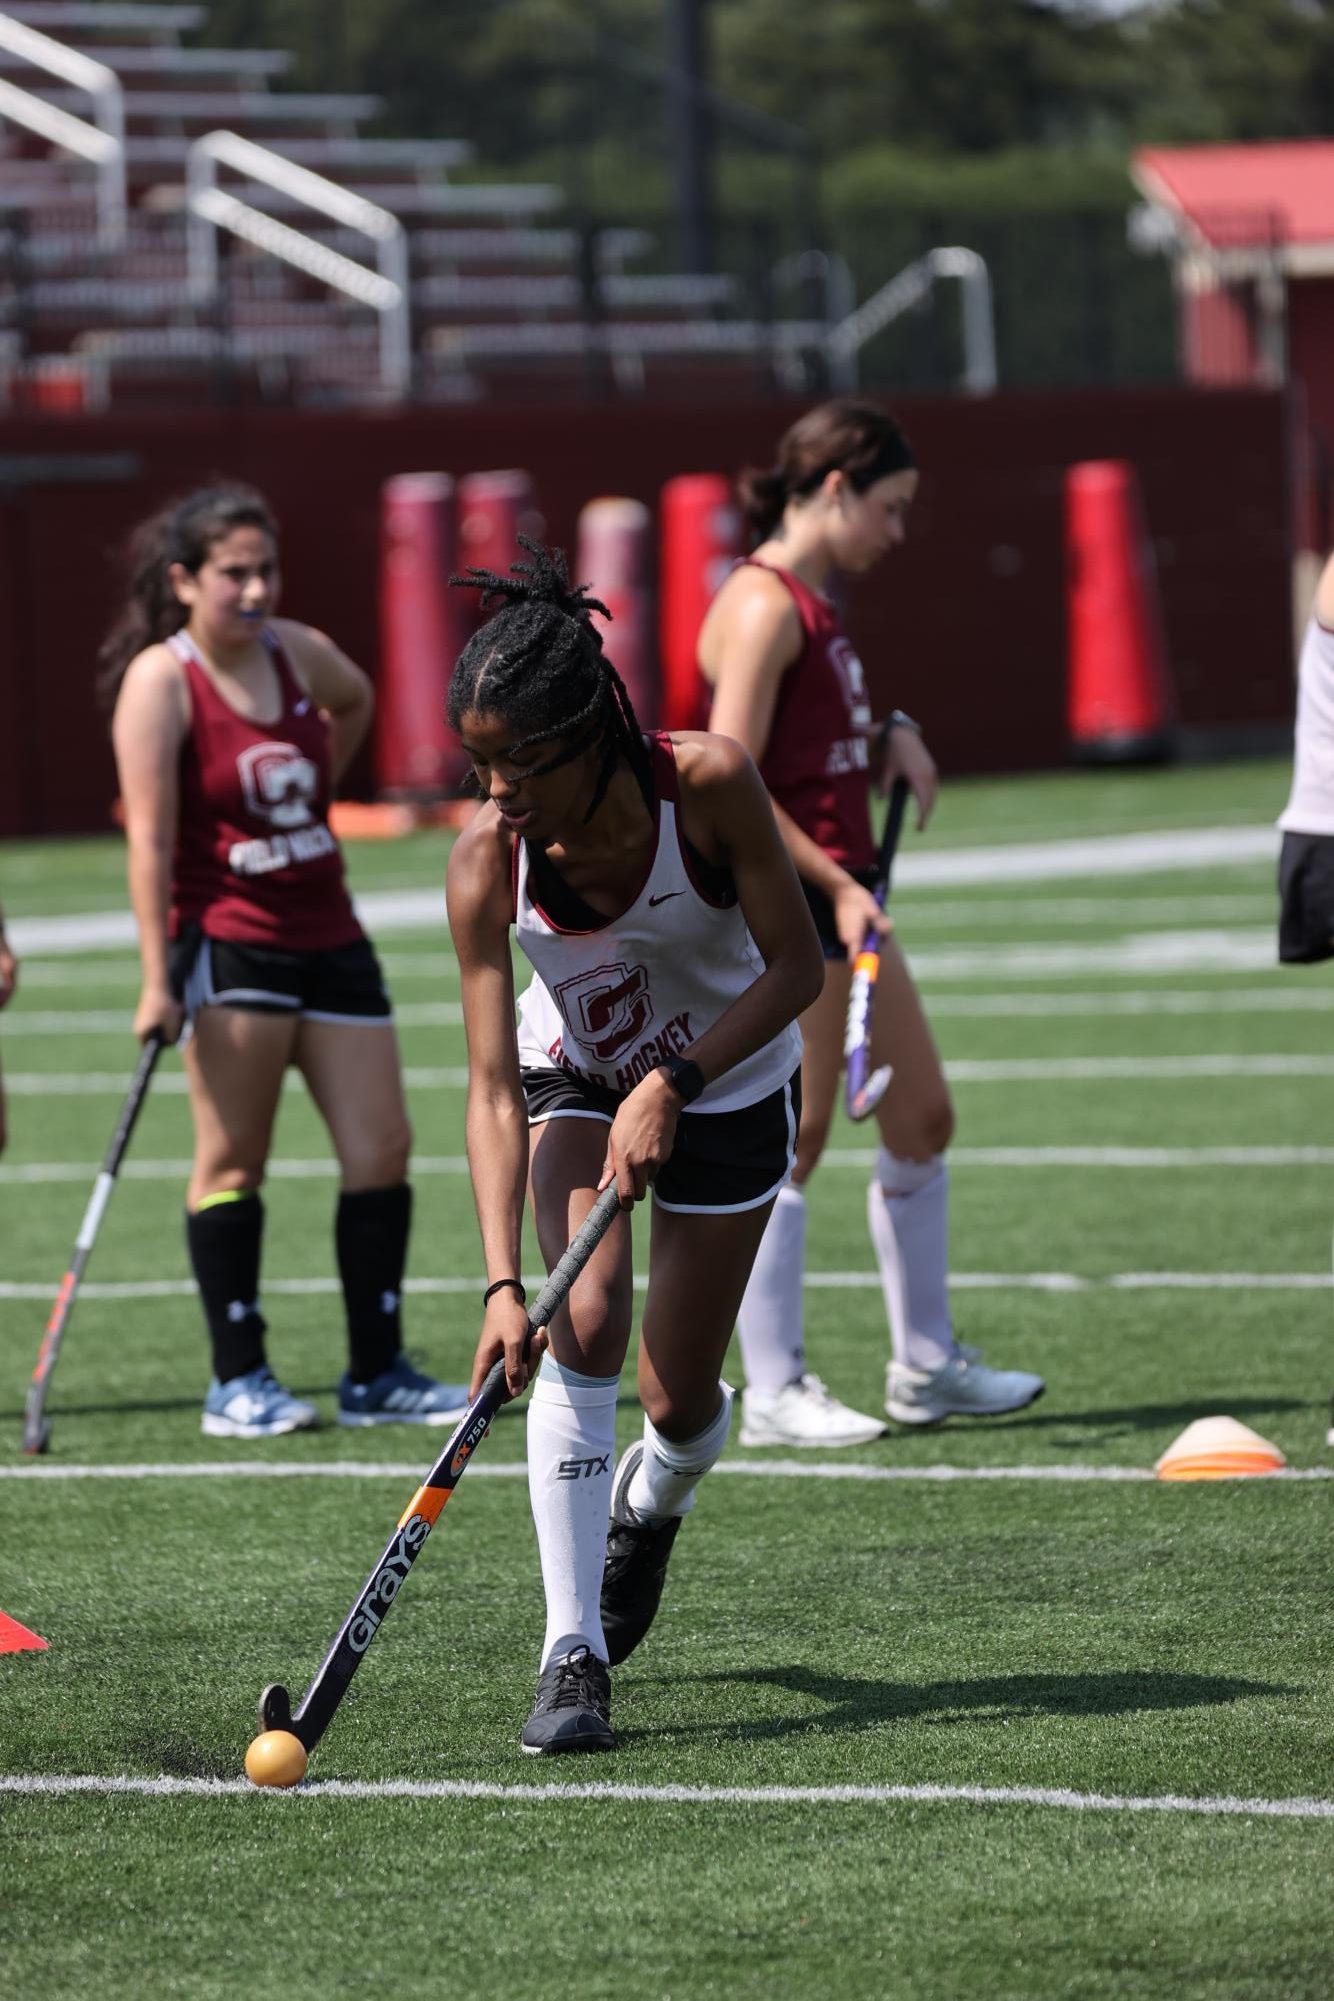 Field hockey practice at the start of the semester.